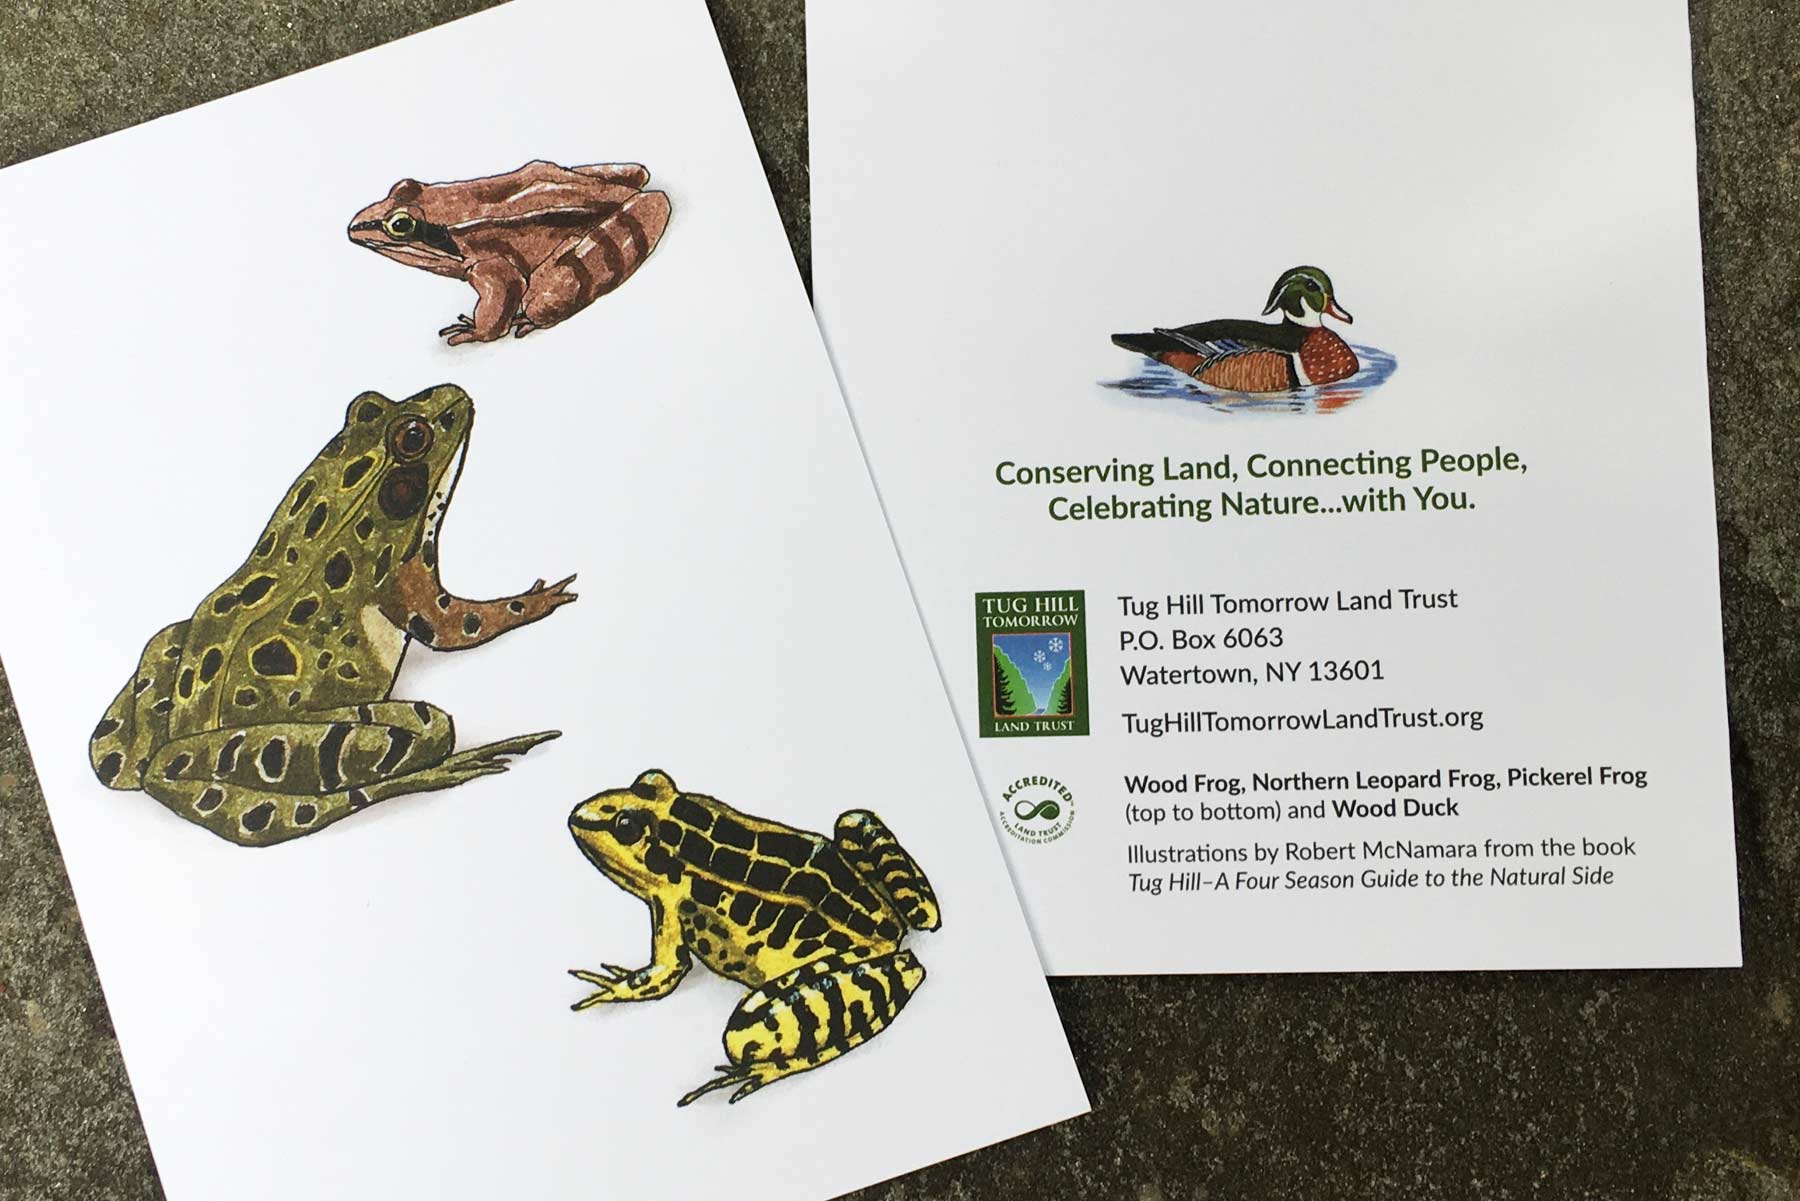 Illustrations of frogs and wood duck by Bob McNamara